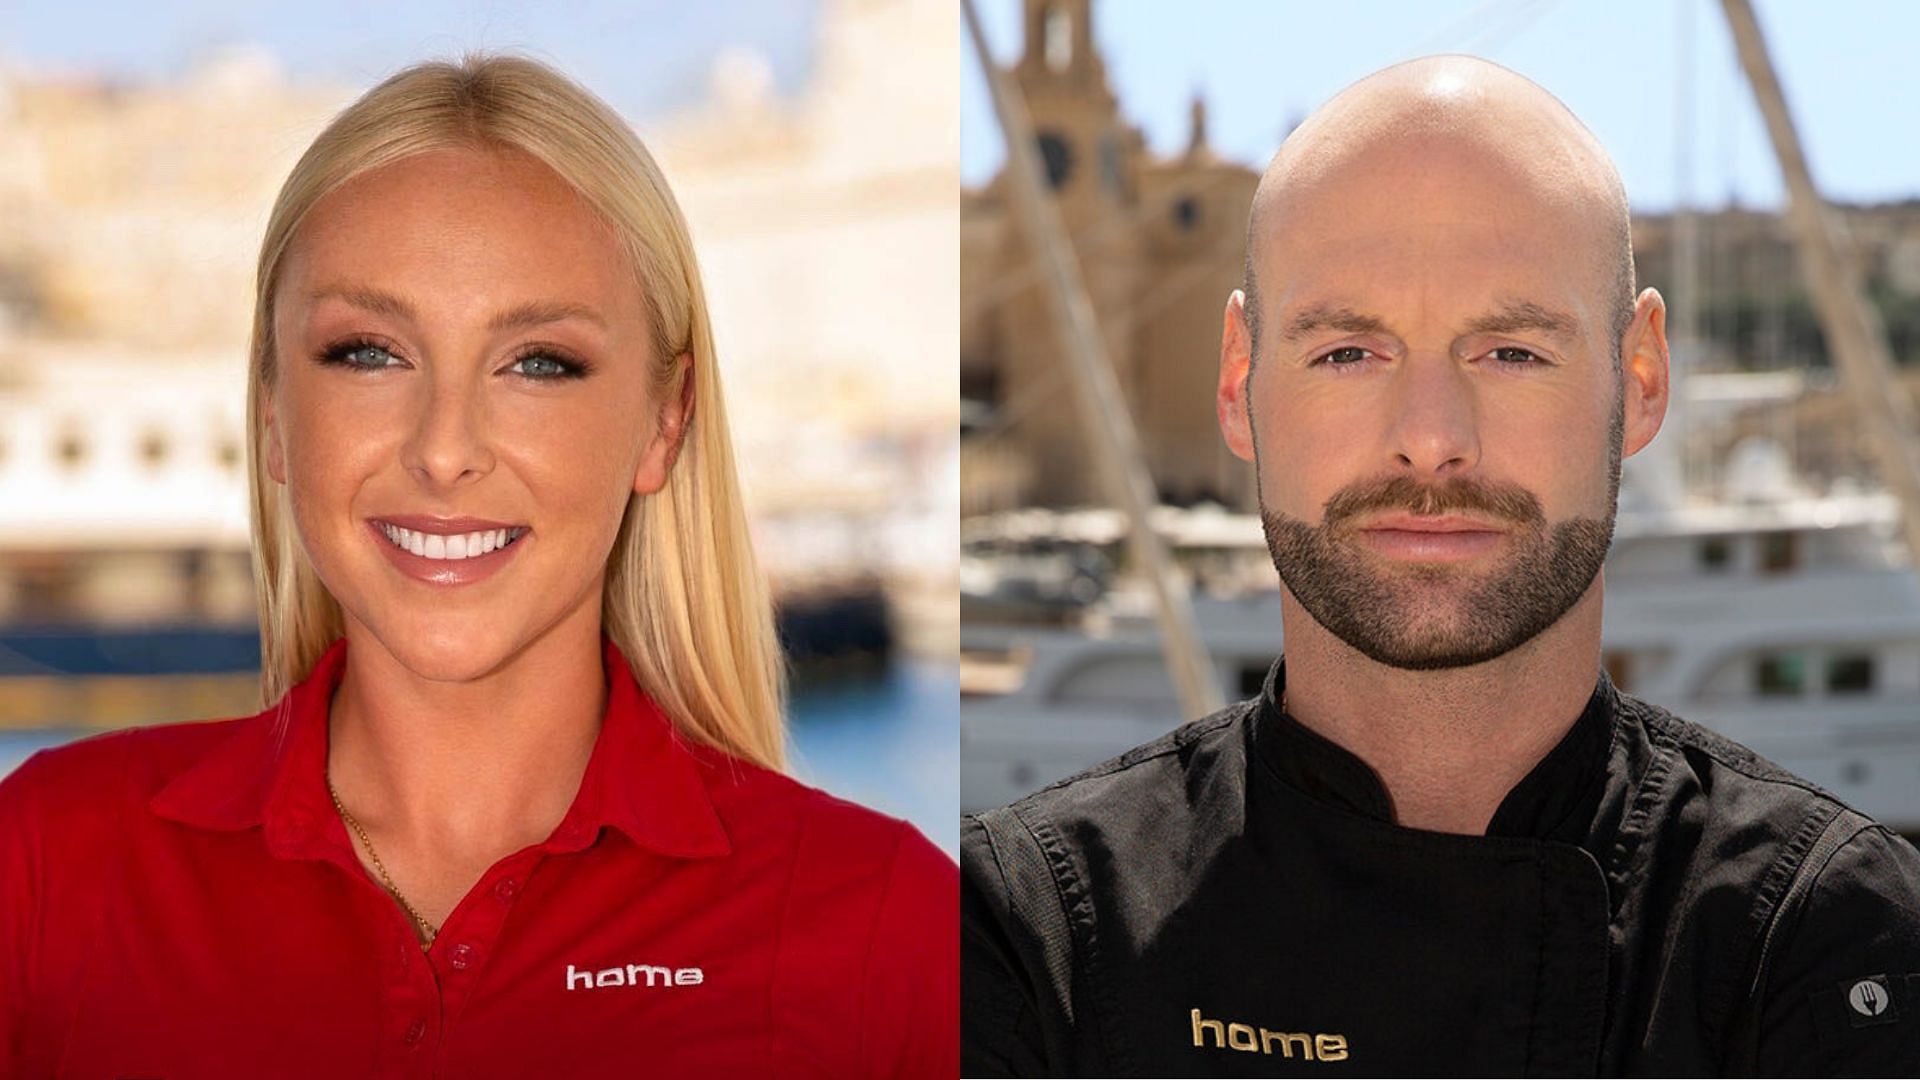 New deckhand Courtney Veale [left] and chef Dave White [right[ from Below Deck Mediterranean (Image via Bravo)